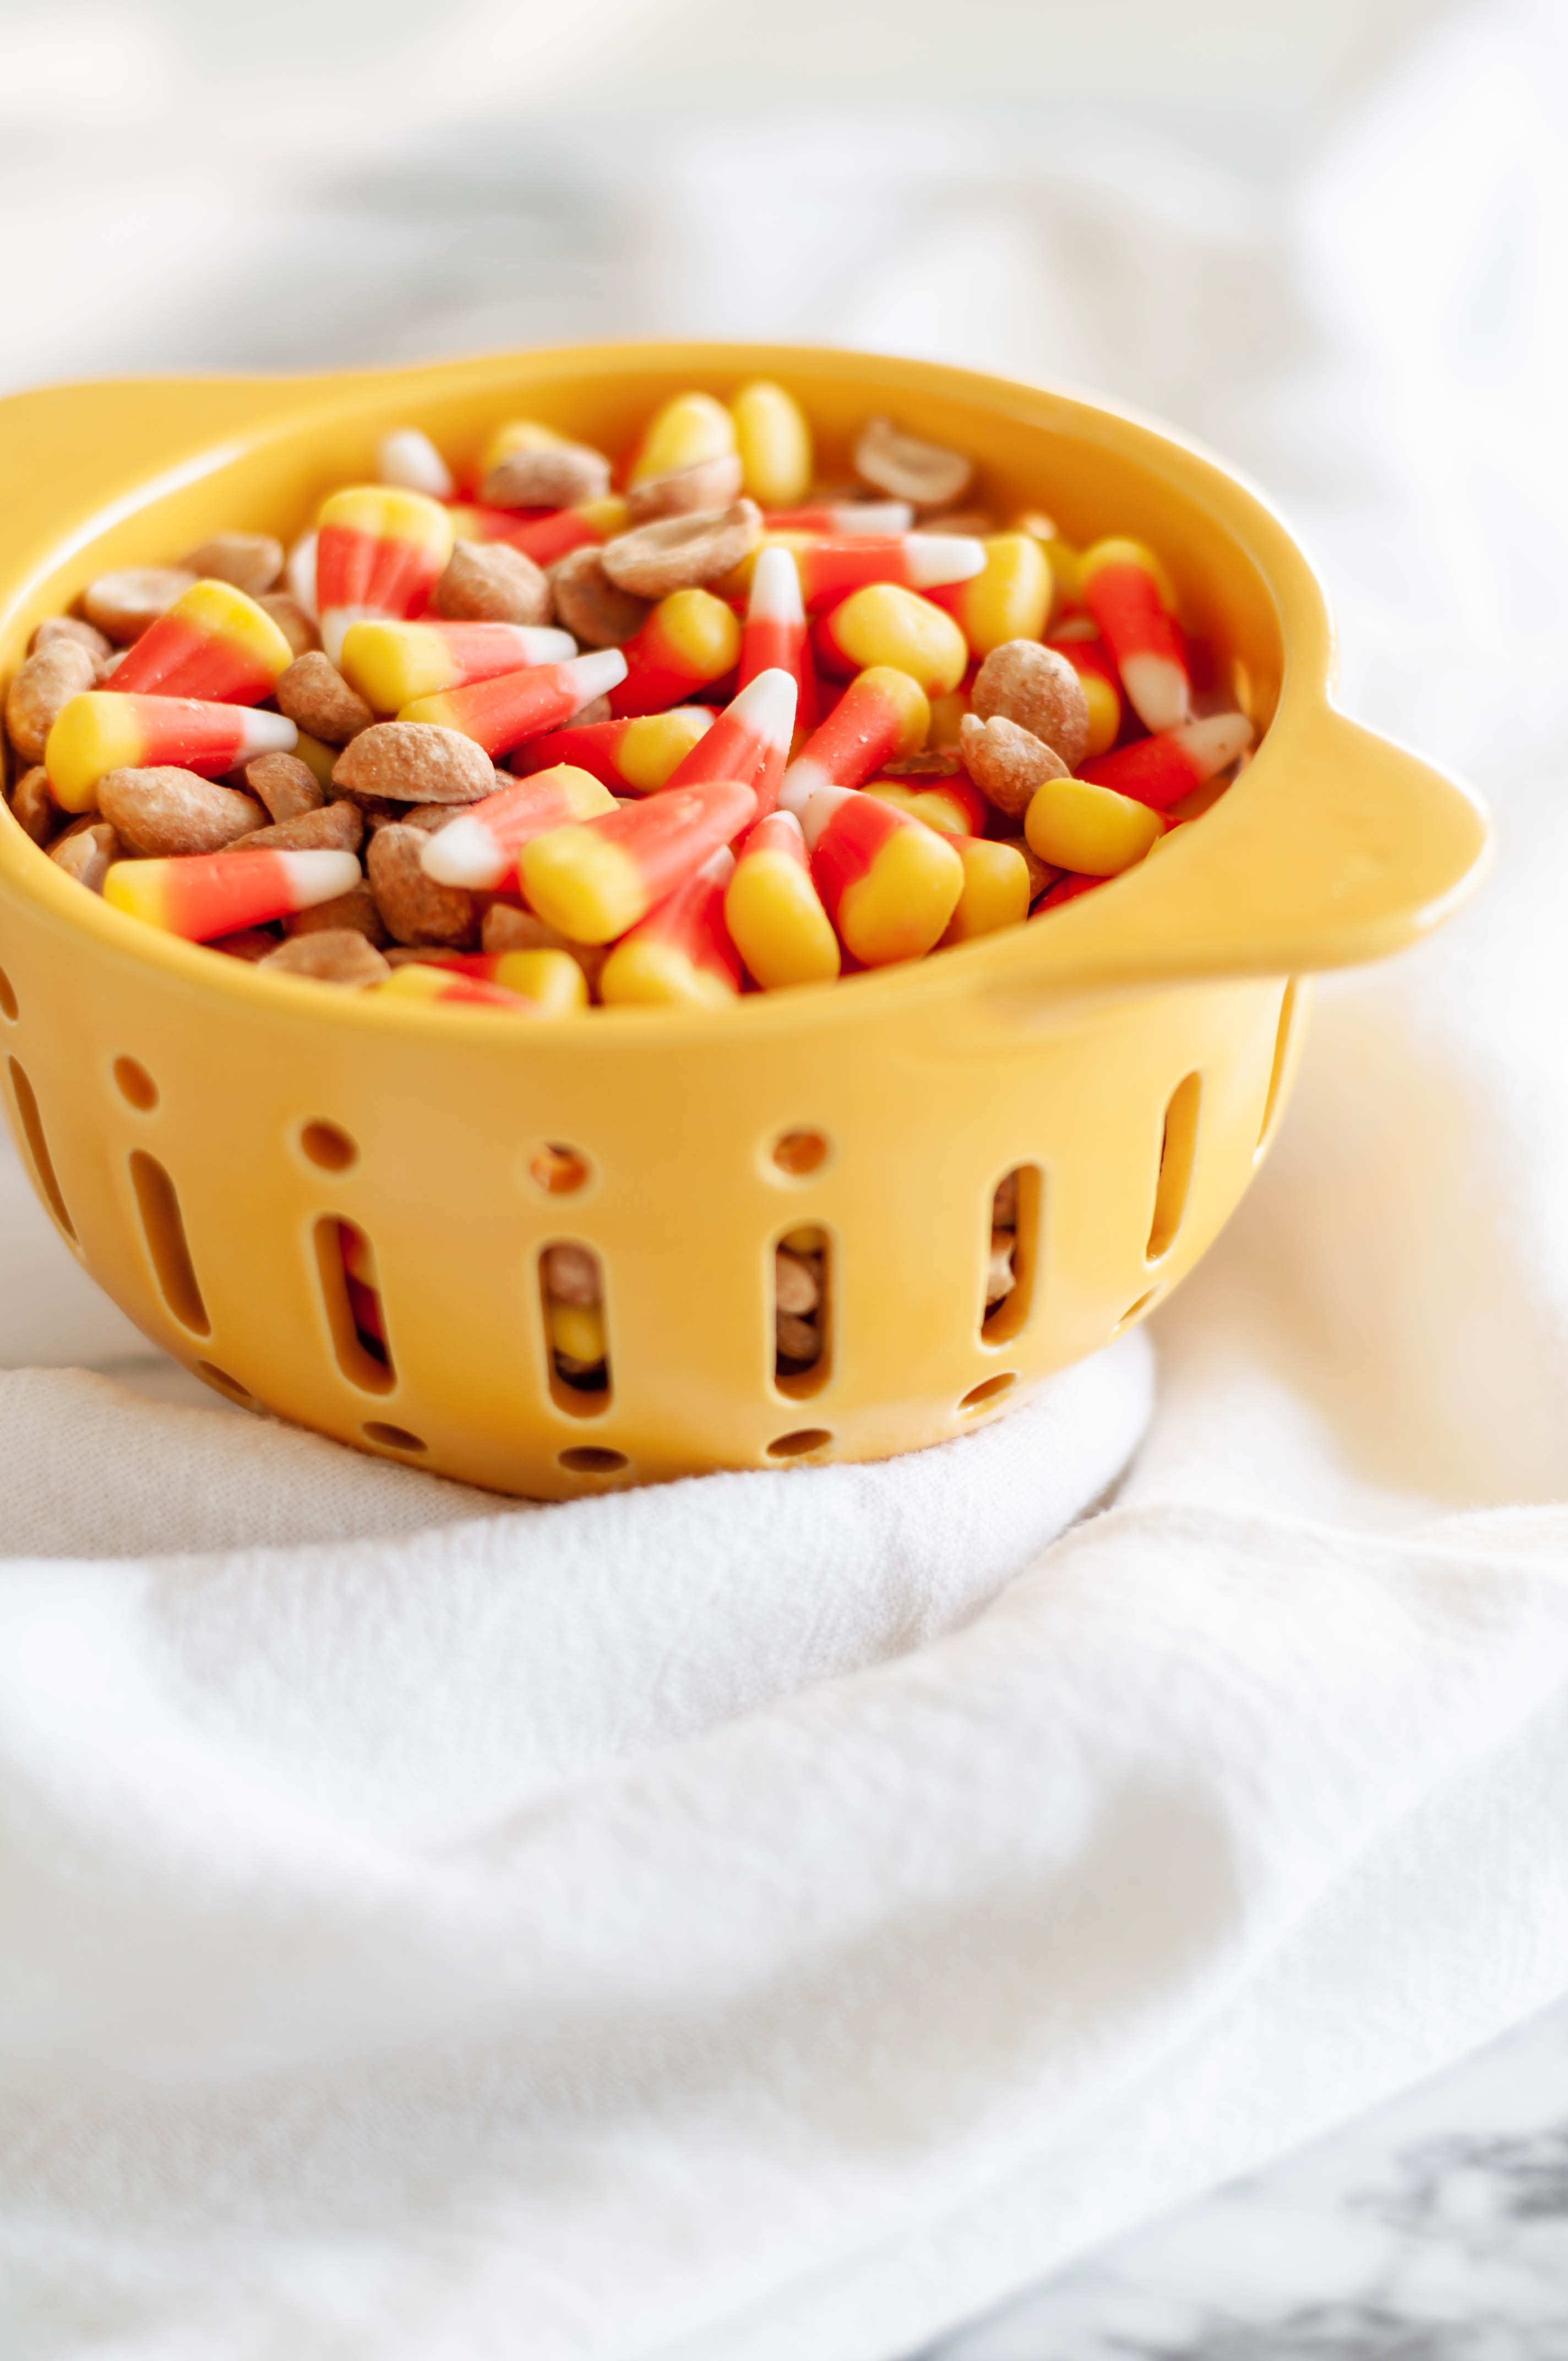 Candy Corn Mix is a simple mix of candy corn and dry roasted peanuts that makes the best sweet and salty treat. Tastes just like a Baby Ruth bar.